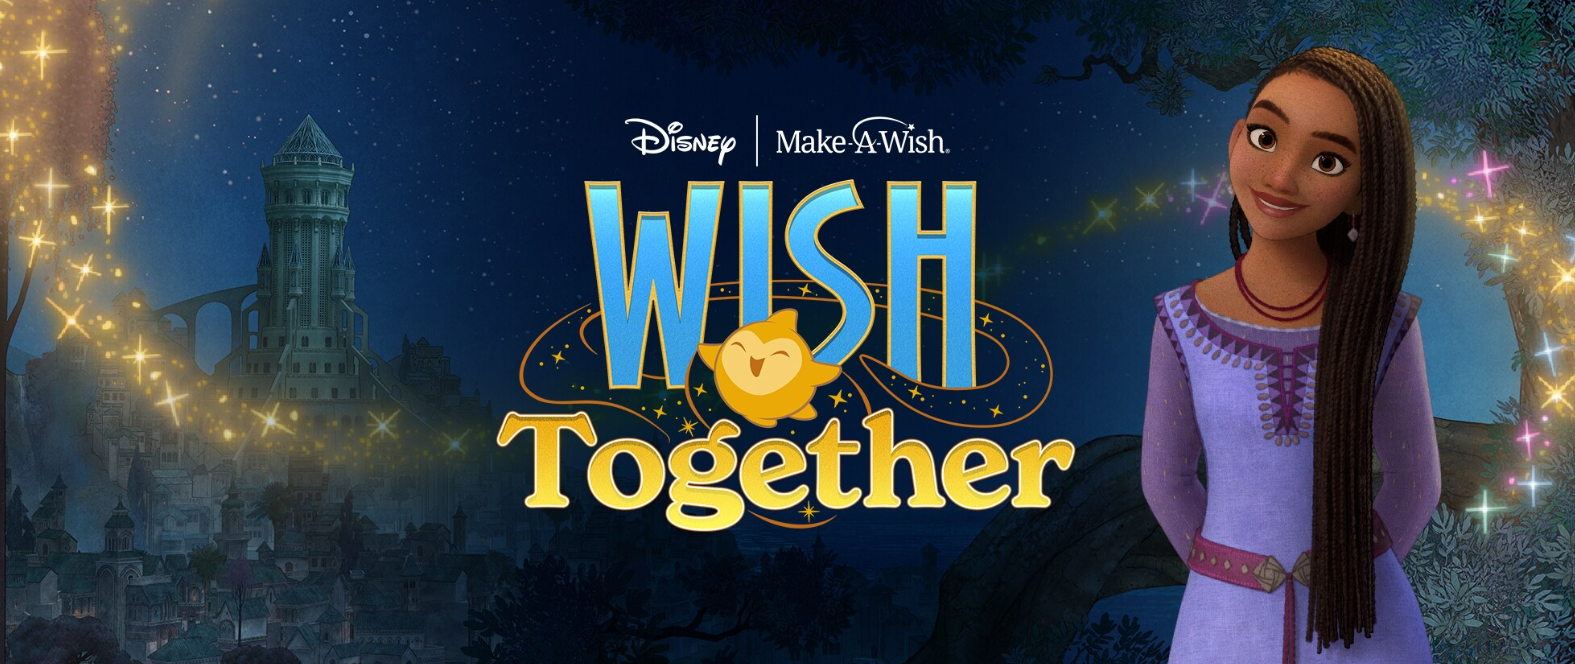 Disney Launches 'Wish Together' Campaign To Celebrate 'Wish' and  Long-Standing Relationship with Make-A-Wish® - The Walt Disney Company